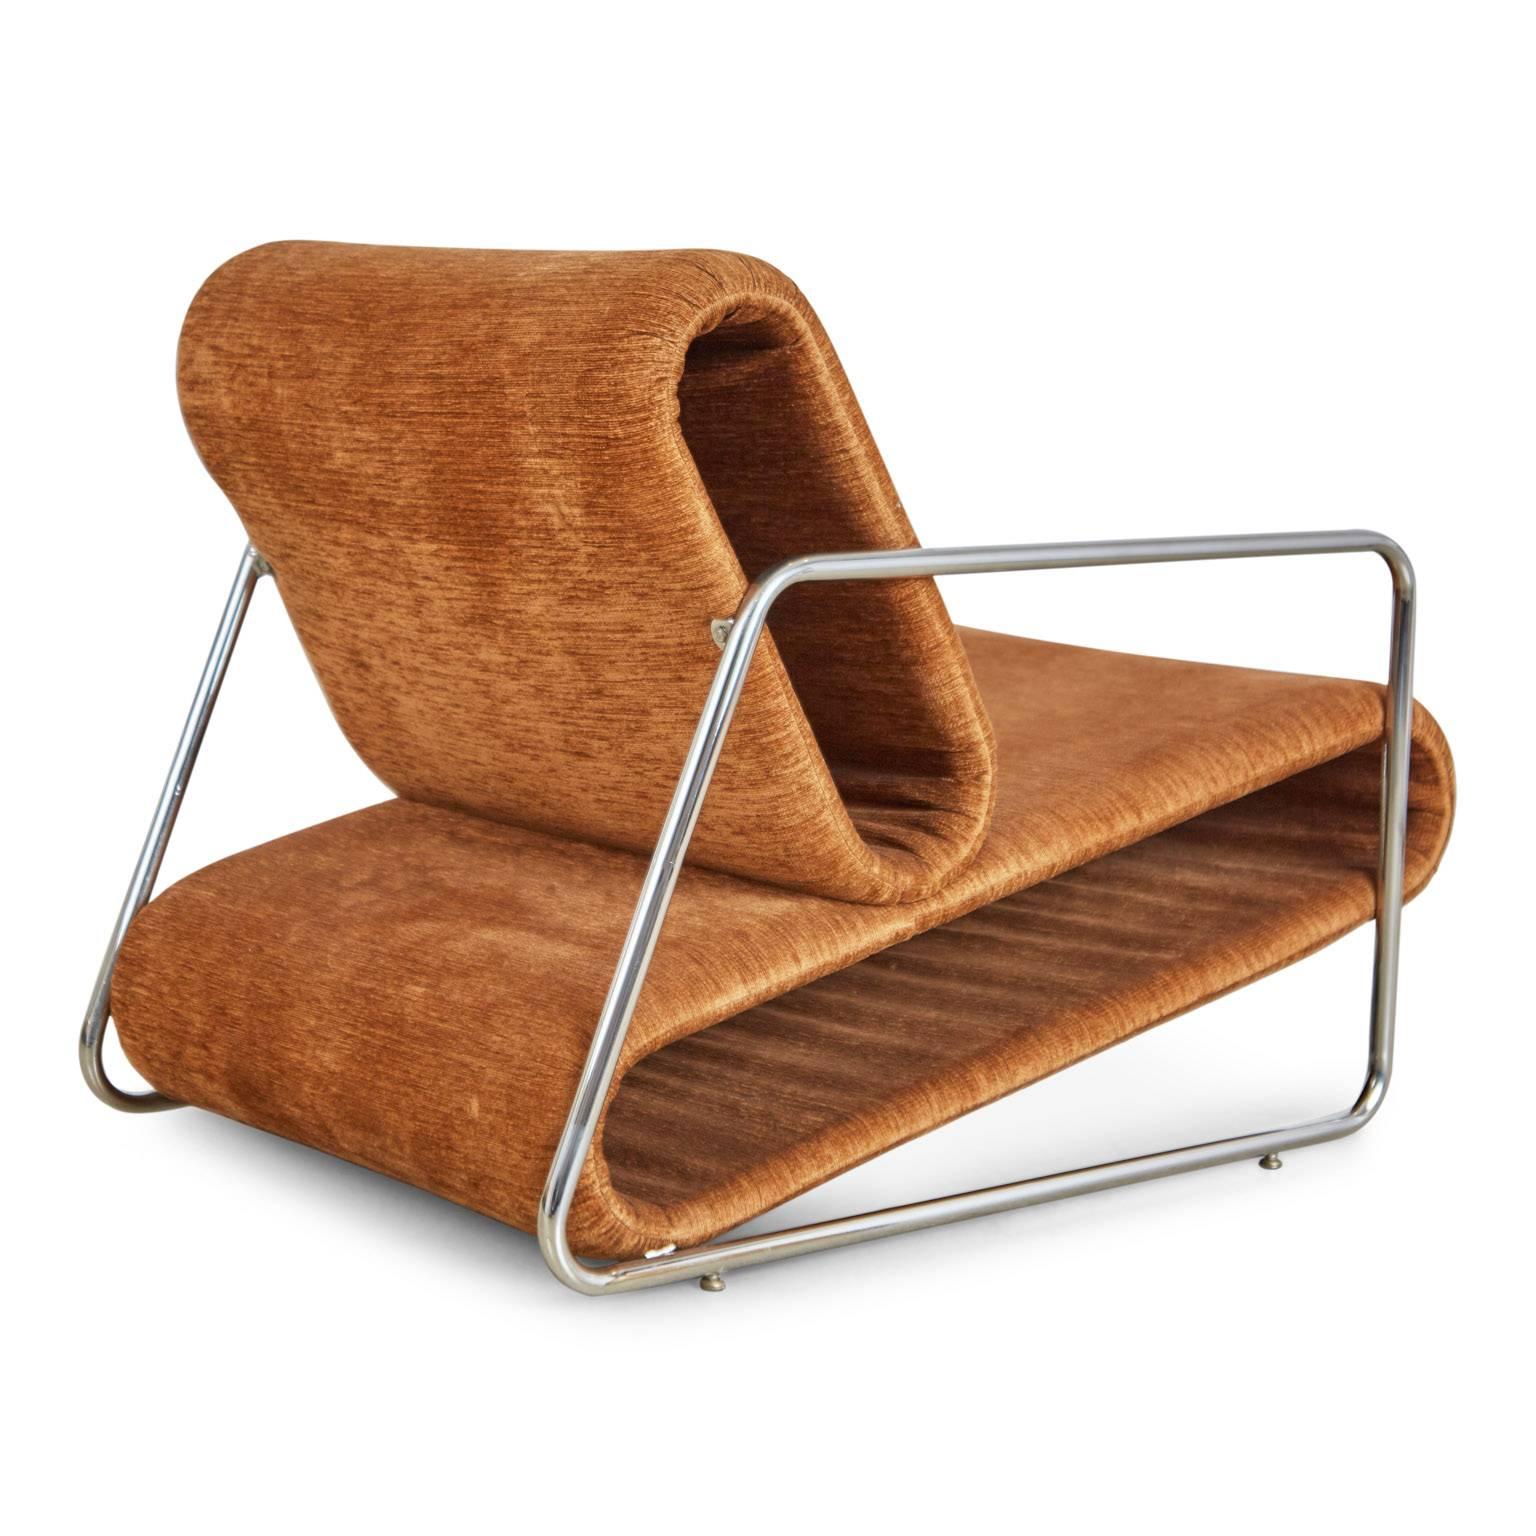 Mid-Century Modern Percival Lafer Prototype Lounge Chairs from Brazil, circa 1970